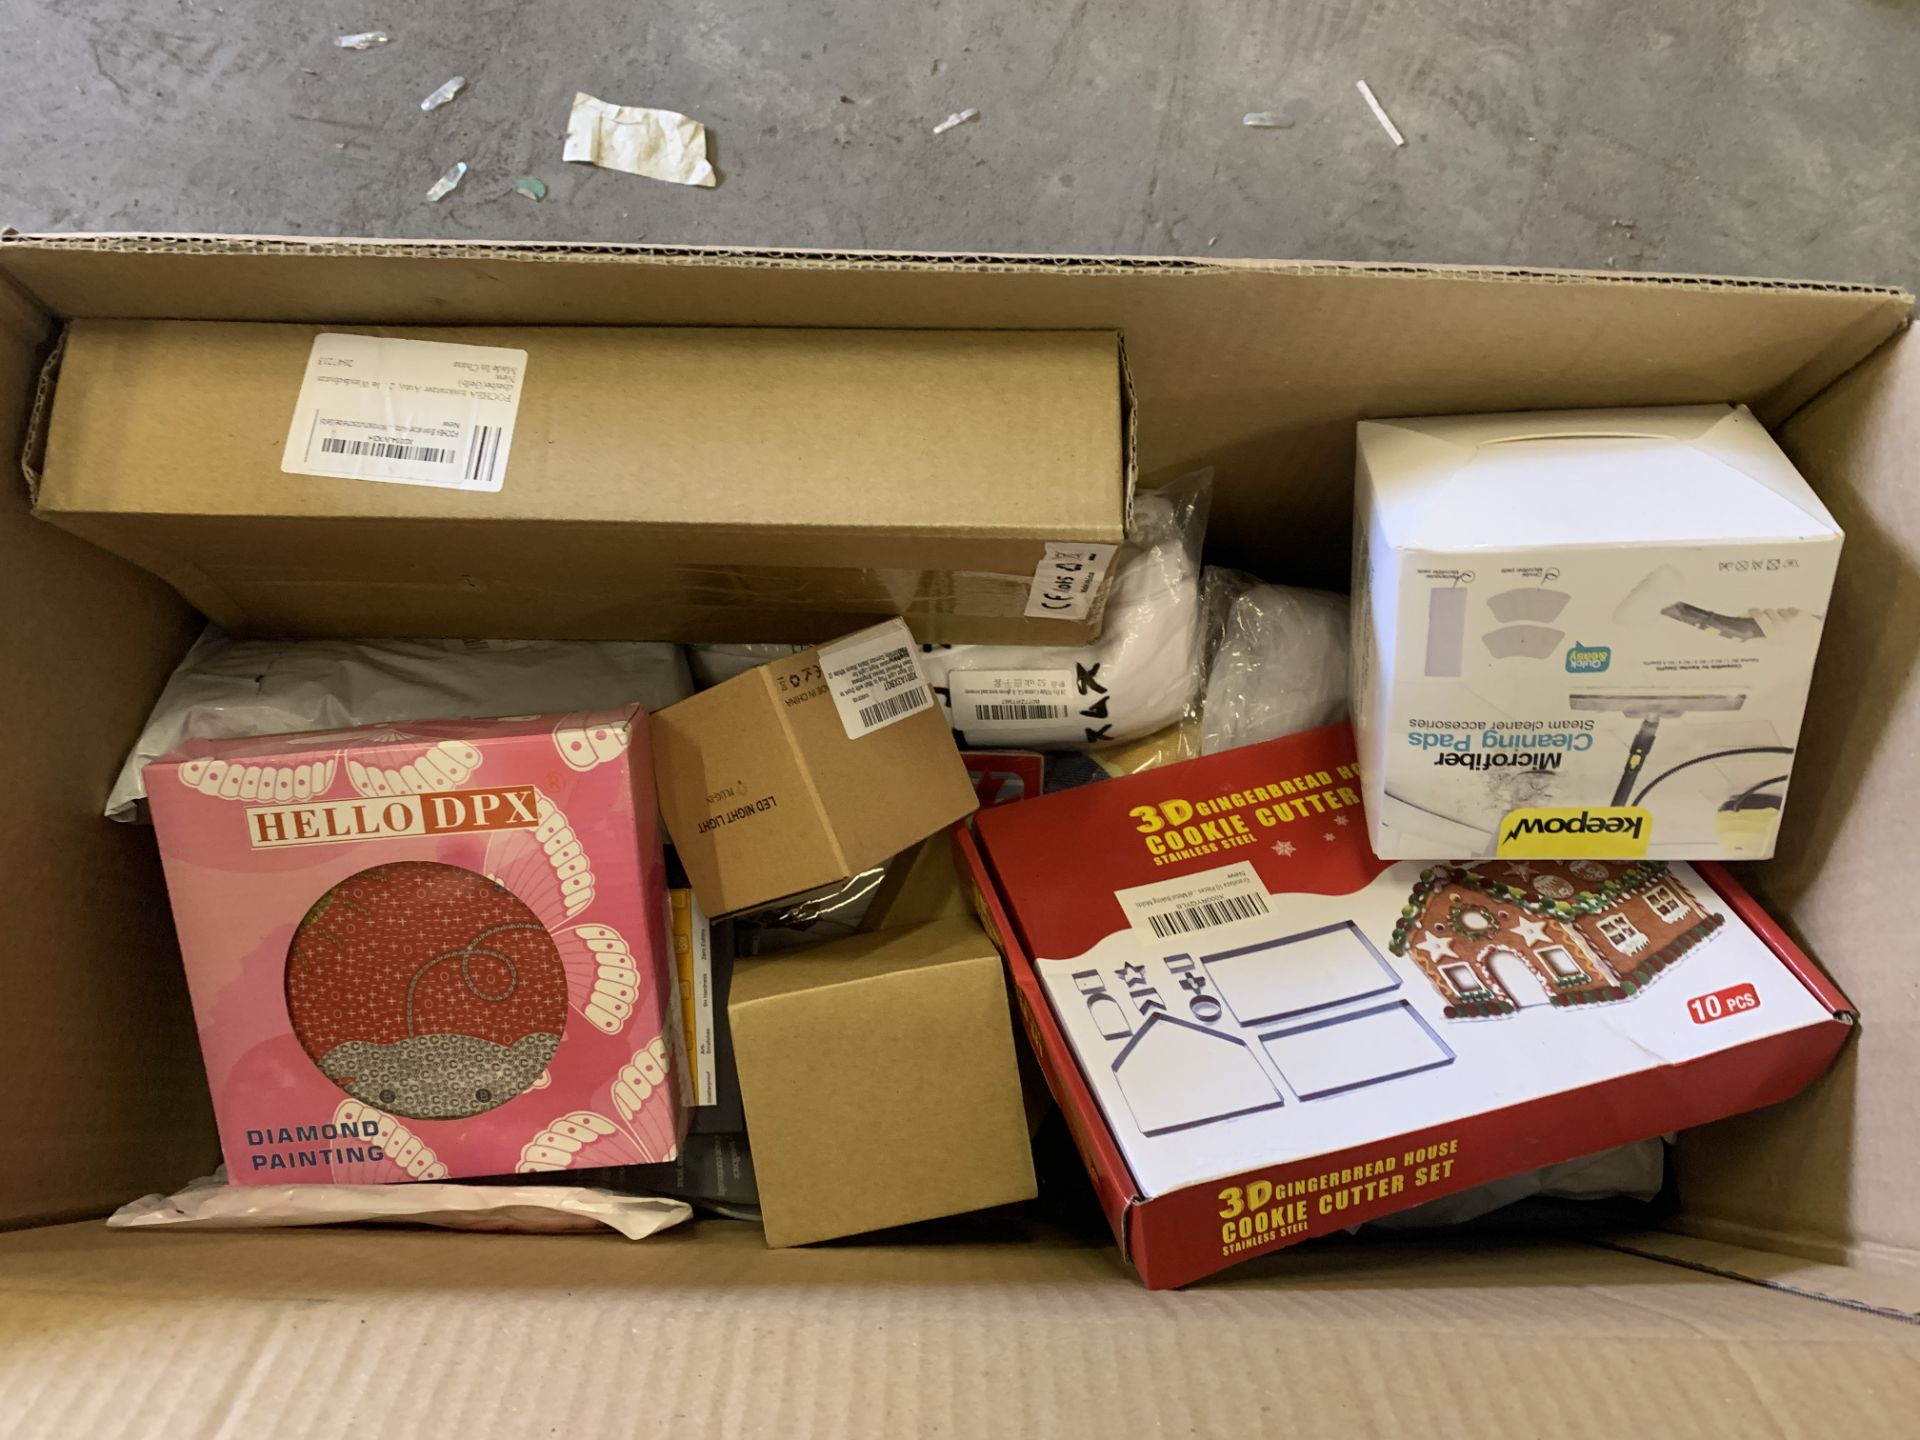 75 PIECE AMAZON END OF LINE LOT INCLUDING COOKIE CUTTER SETS, CLEANING PADS, LED NIGHT LIGHTS,